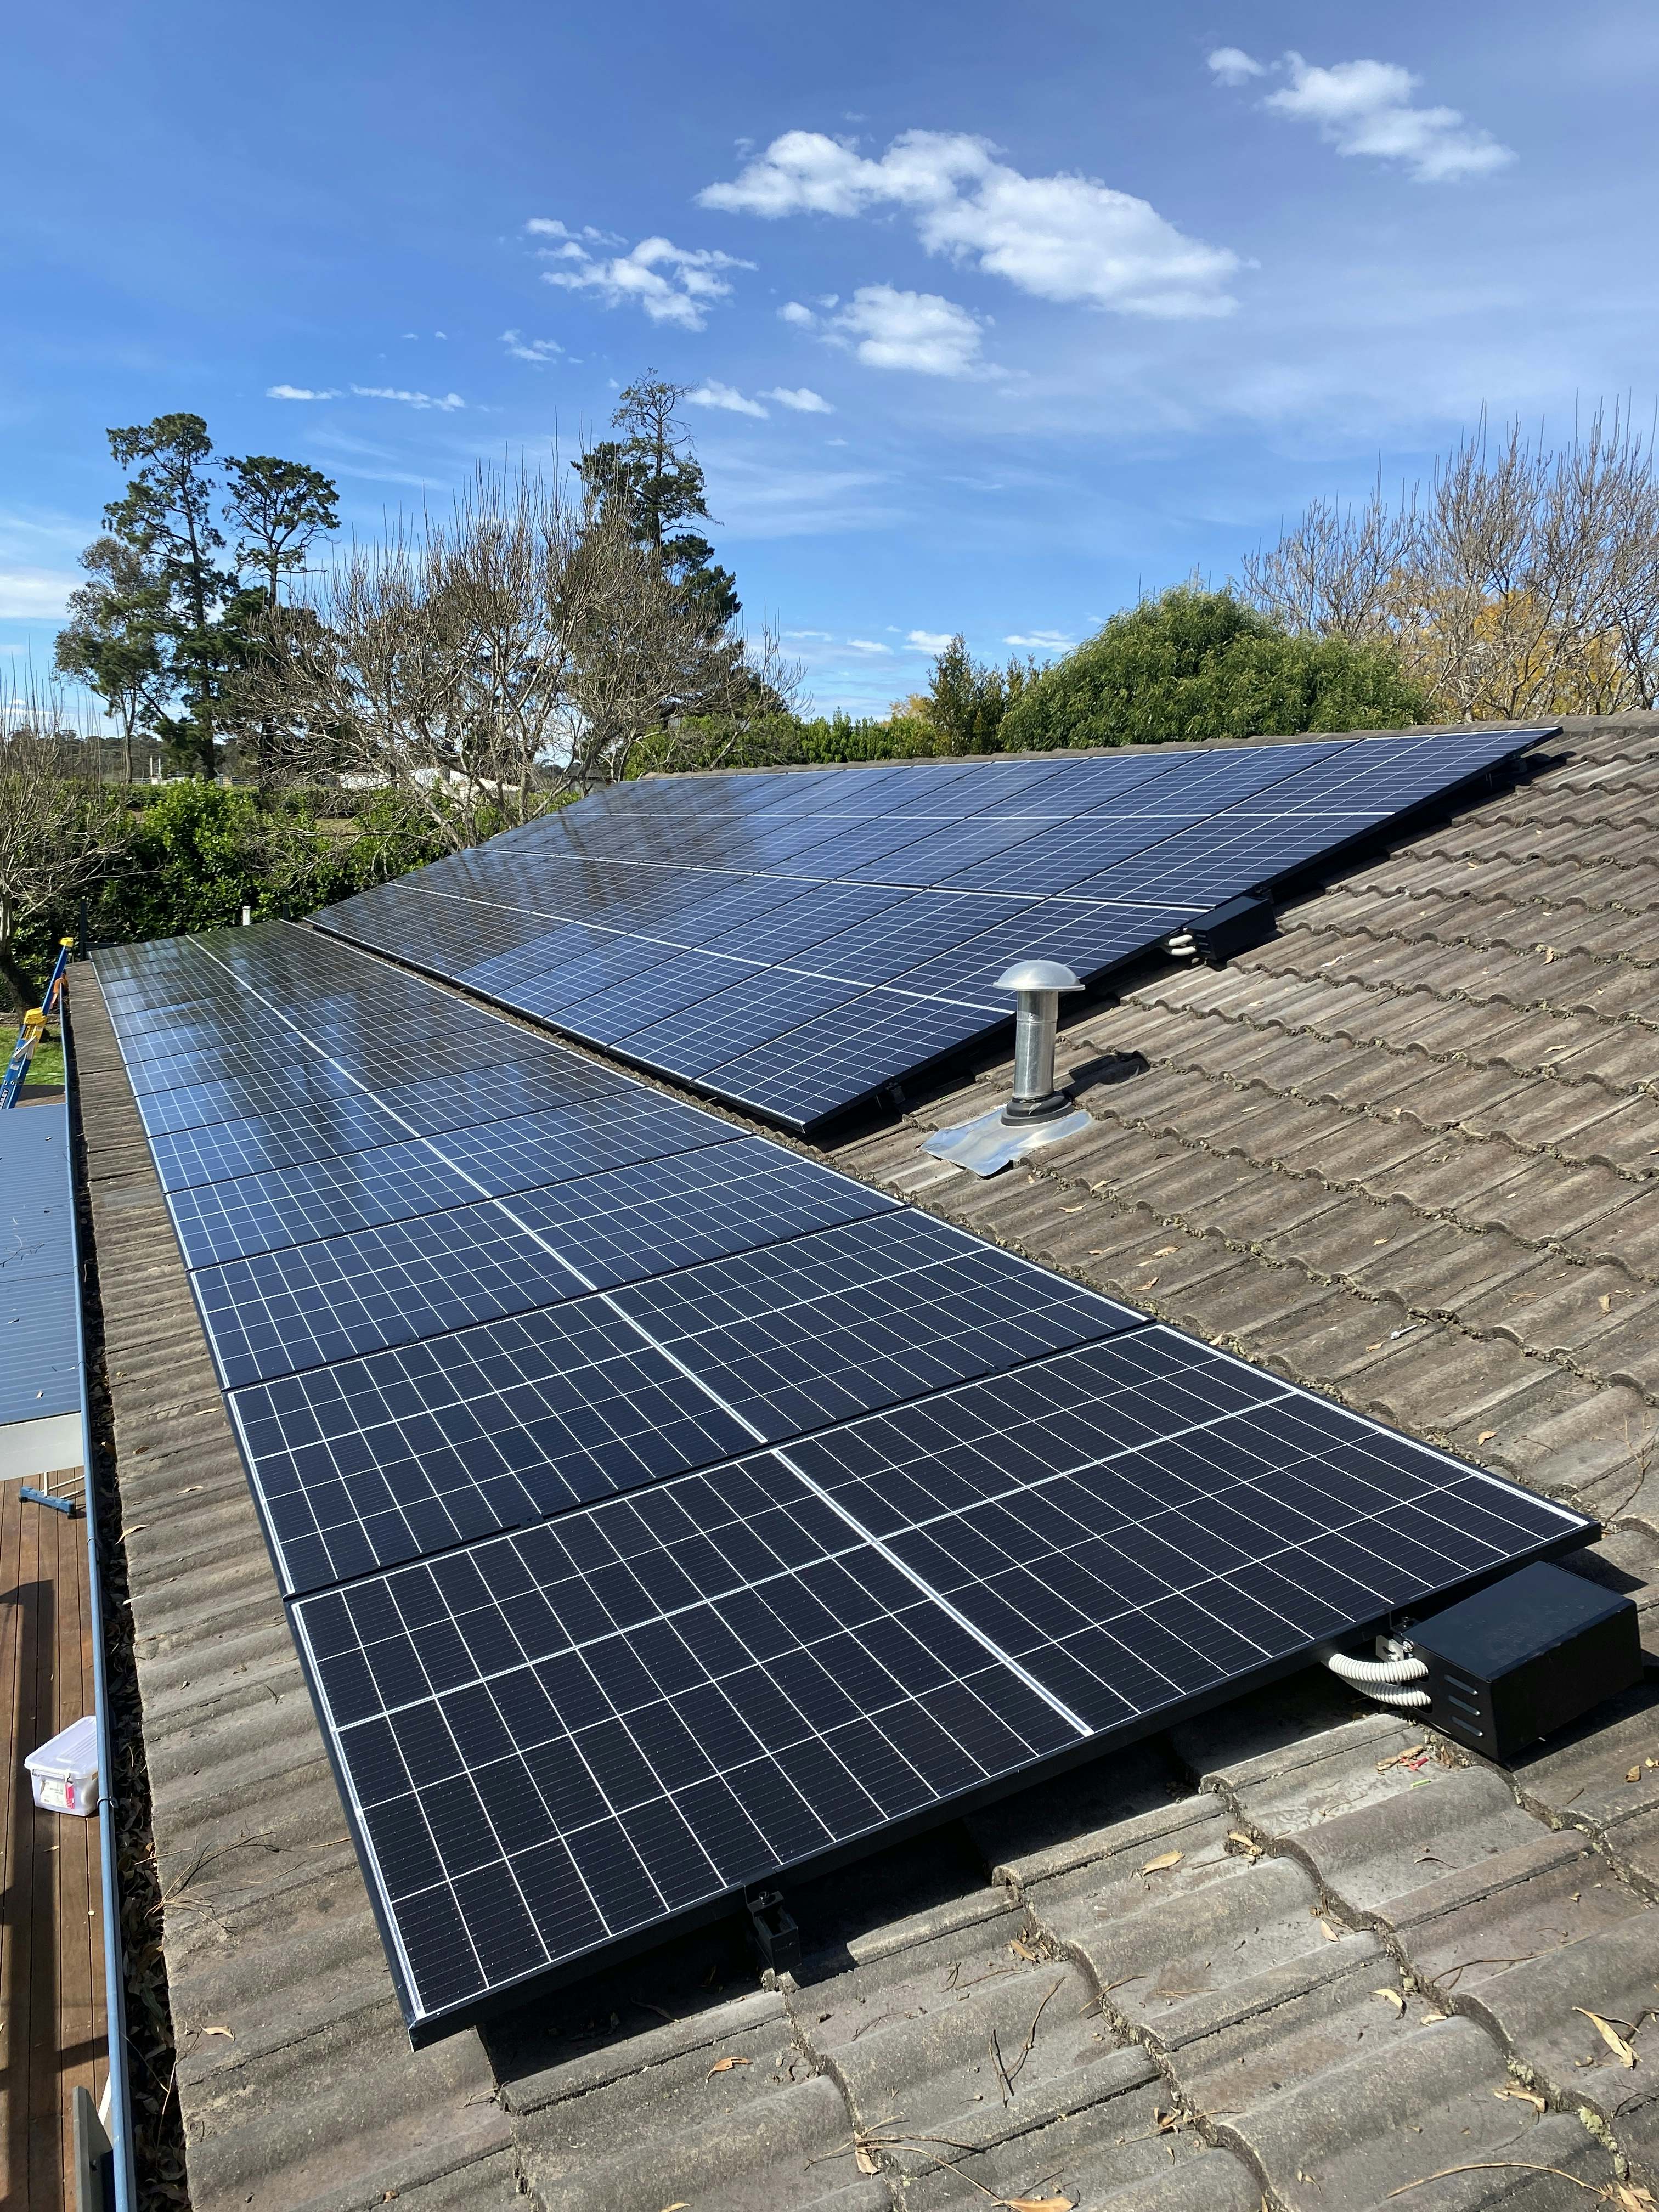 15kW solar panel system installed in a roof